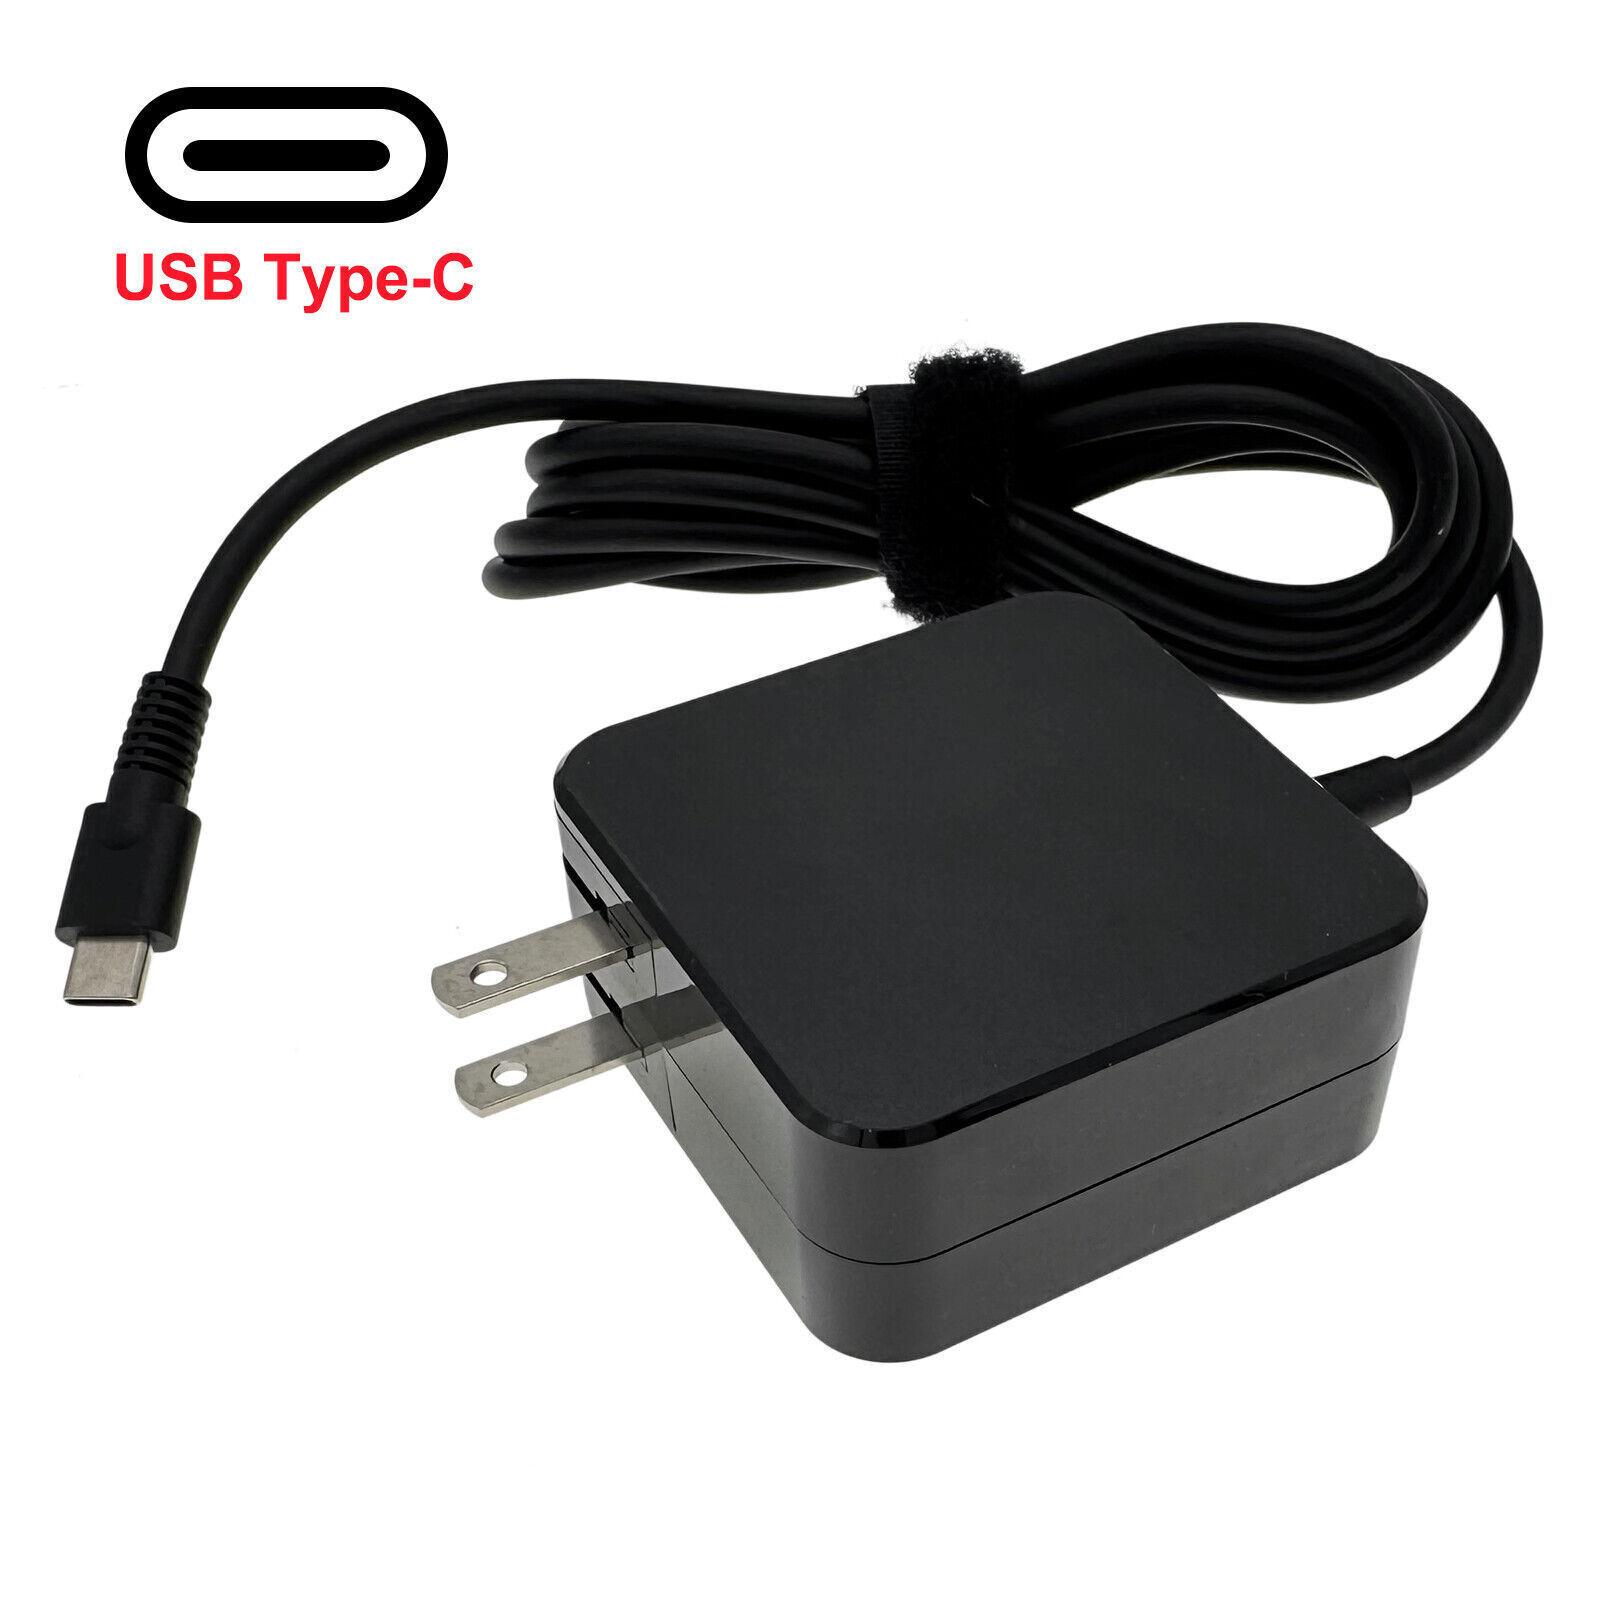 Type C 45W AC Adapter Charger For Toshiba Tecra X40 X40-C X40-D X40-E1420 Laptop